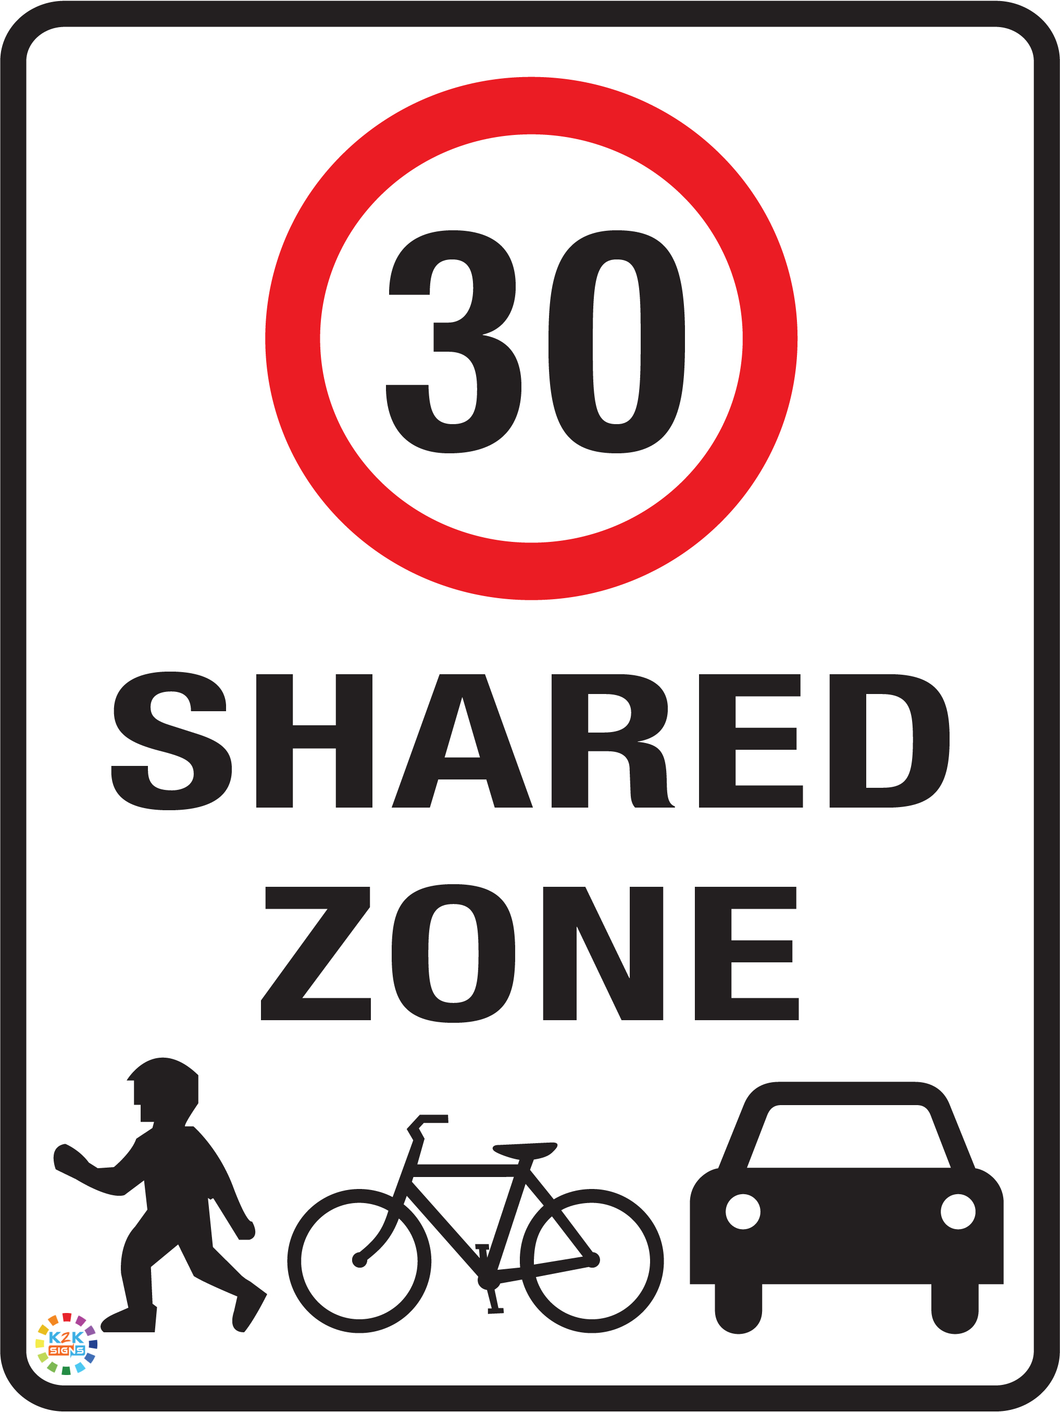 Shared Zone Speed Limit 30 Kph Sign